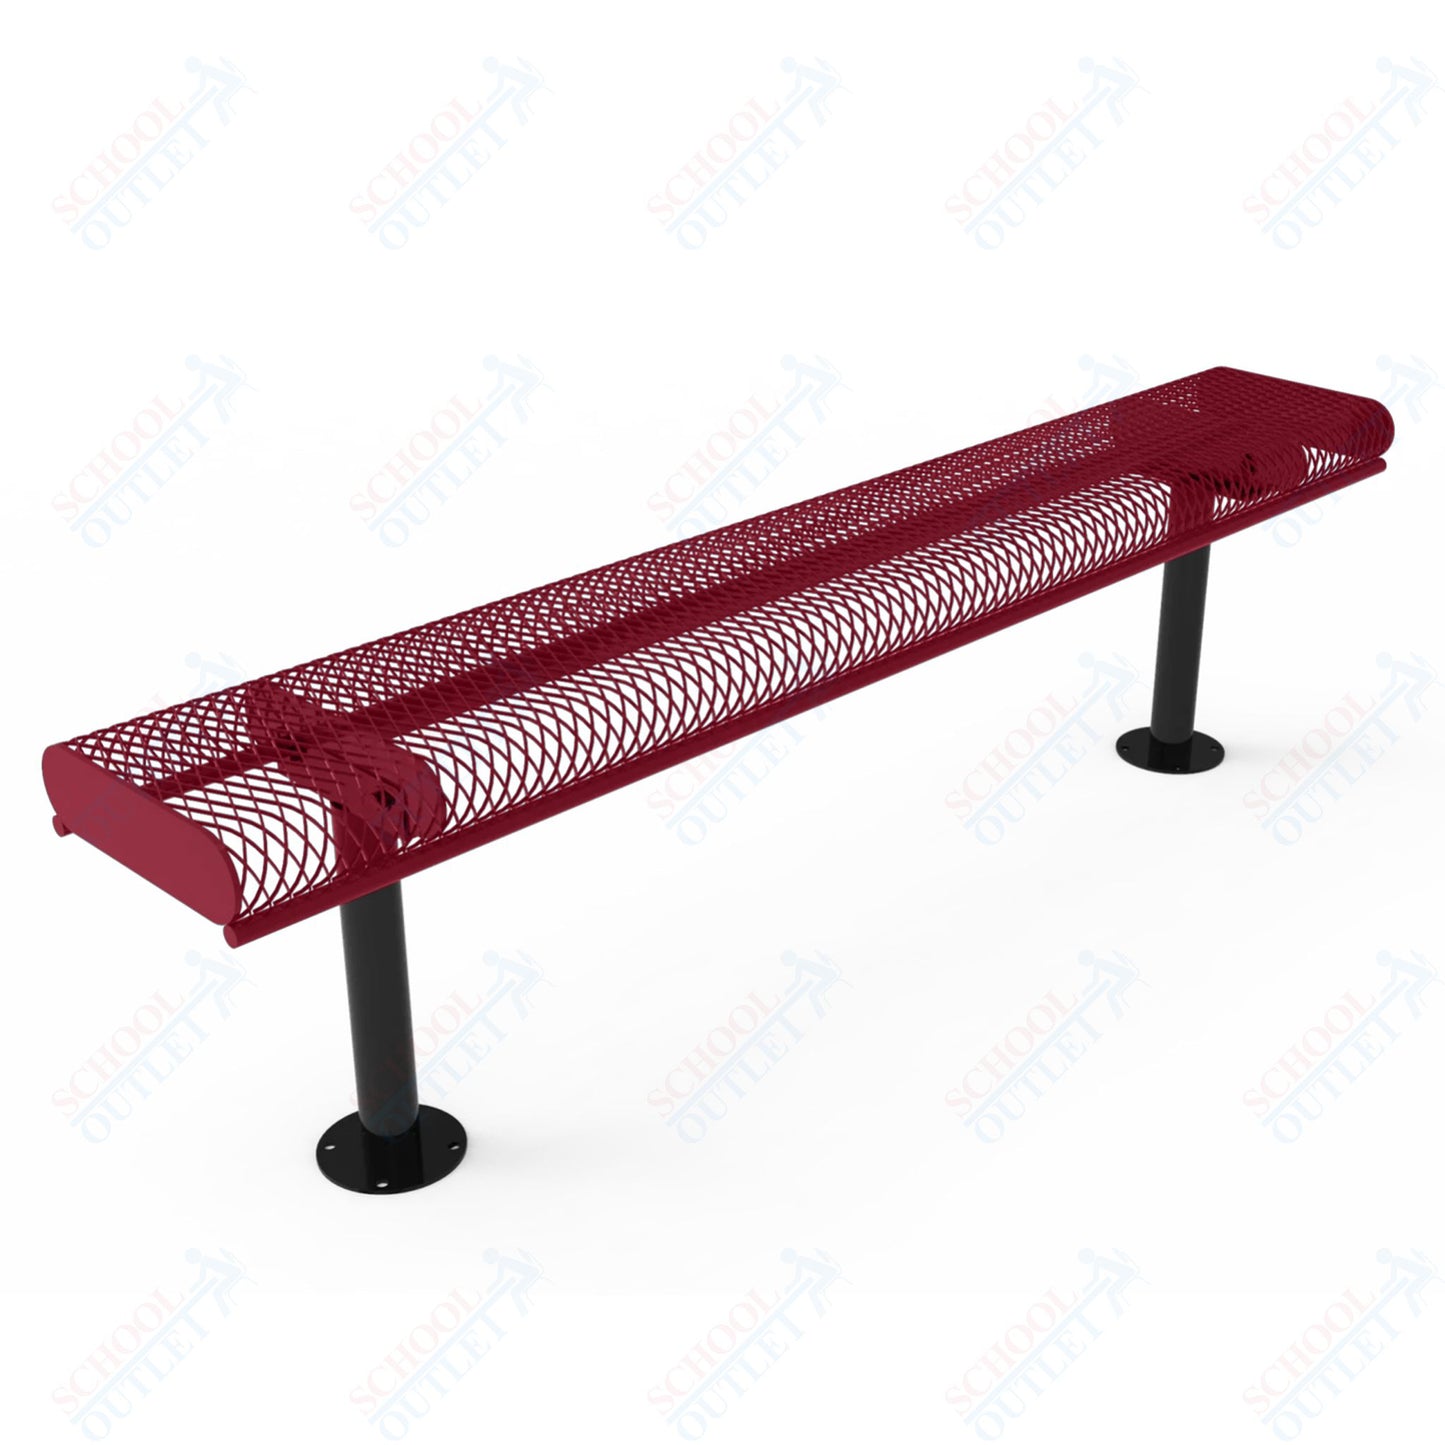 MyTcoat - Rolled Edges Outdoor Bench without Back 4' L - Surface Mount (MYT-BRE04-23)